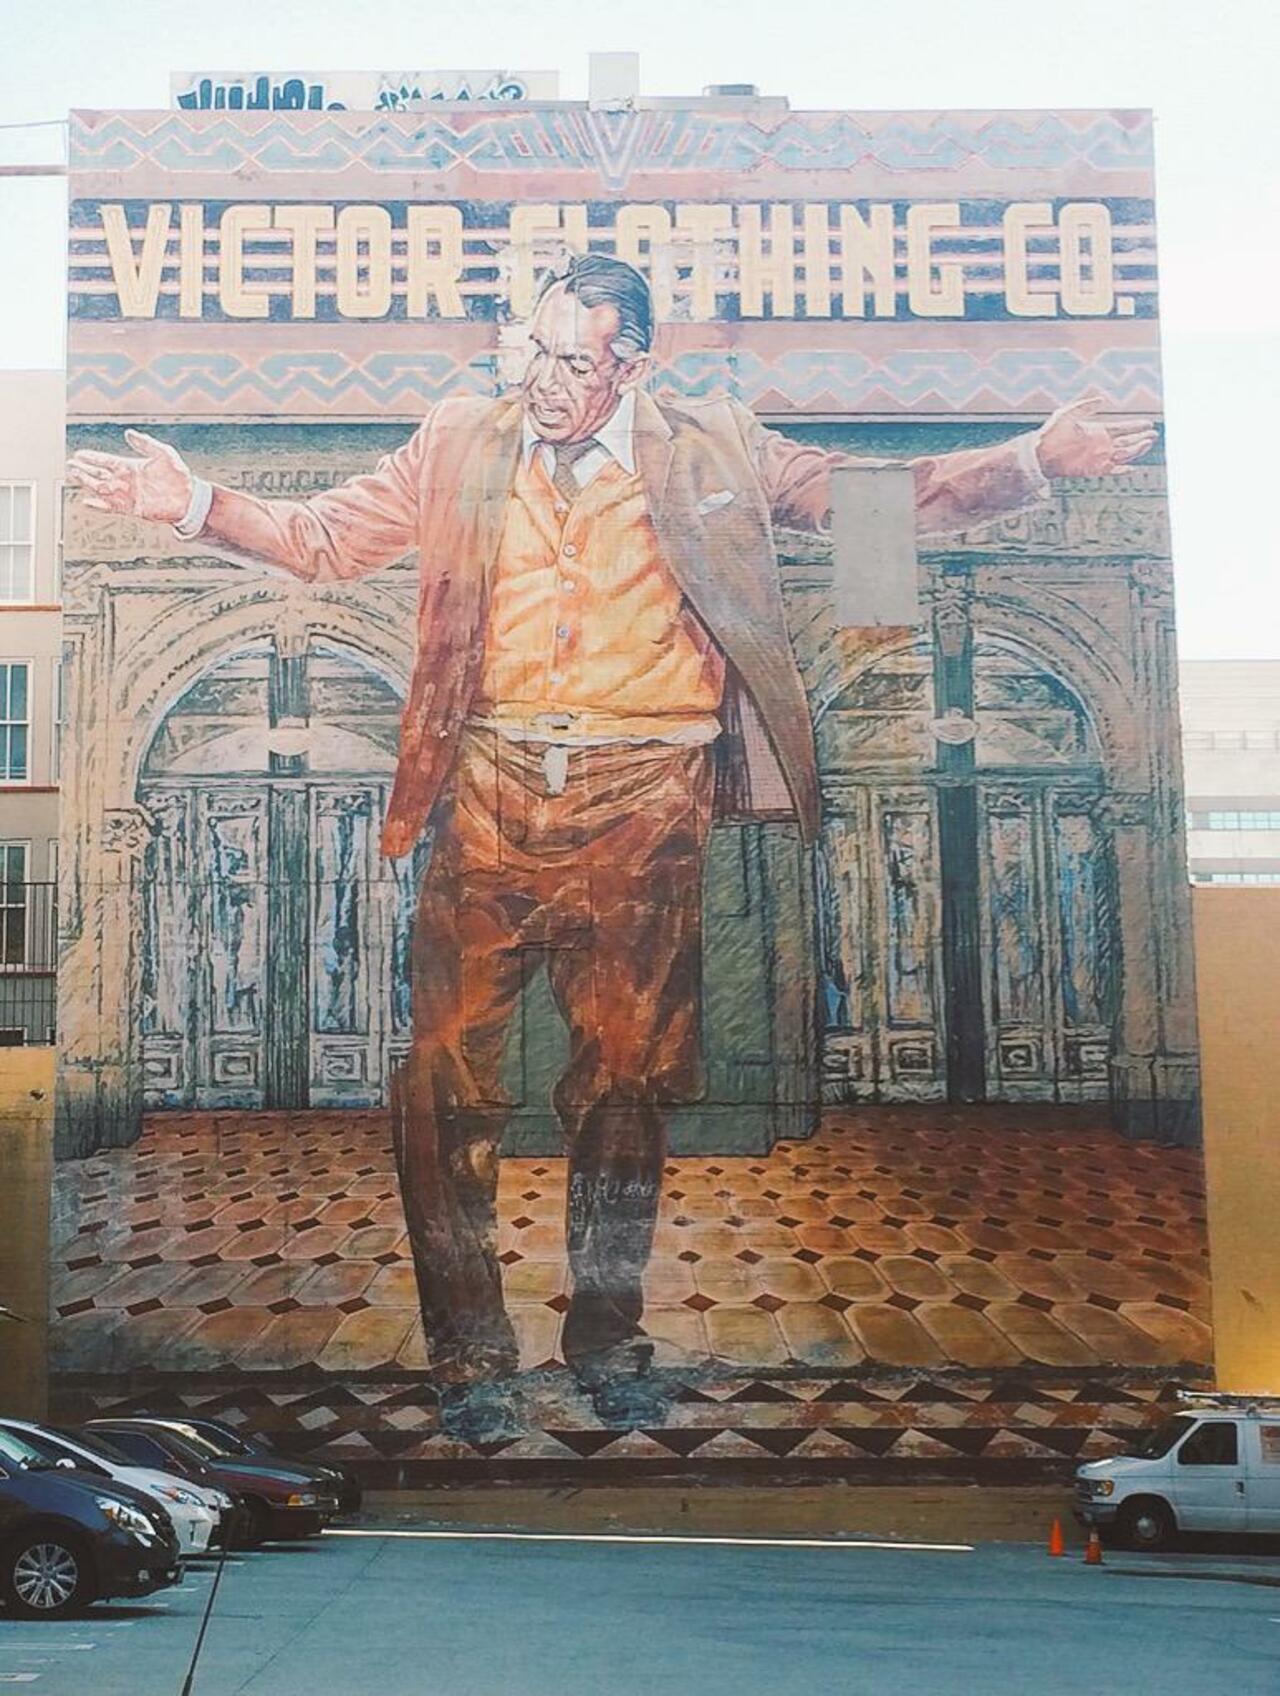 #mural #streetart dedicated #mexican #hollywood #actor #anthonyquinn #hispanicheritagemonth #famousmexican #graffiti http://t.co/ADrK0oGSMp